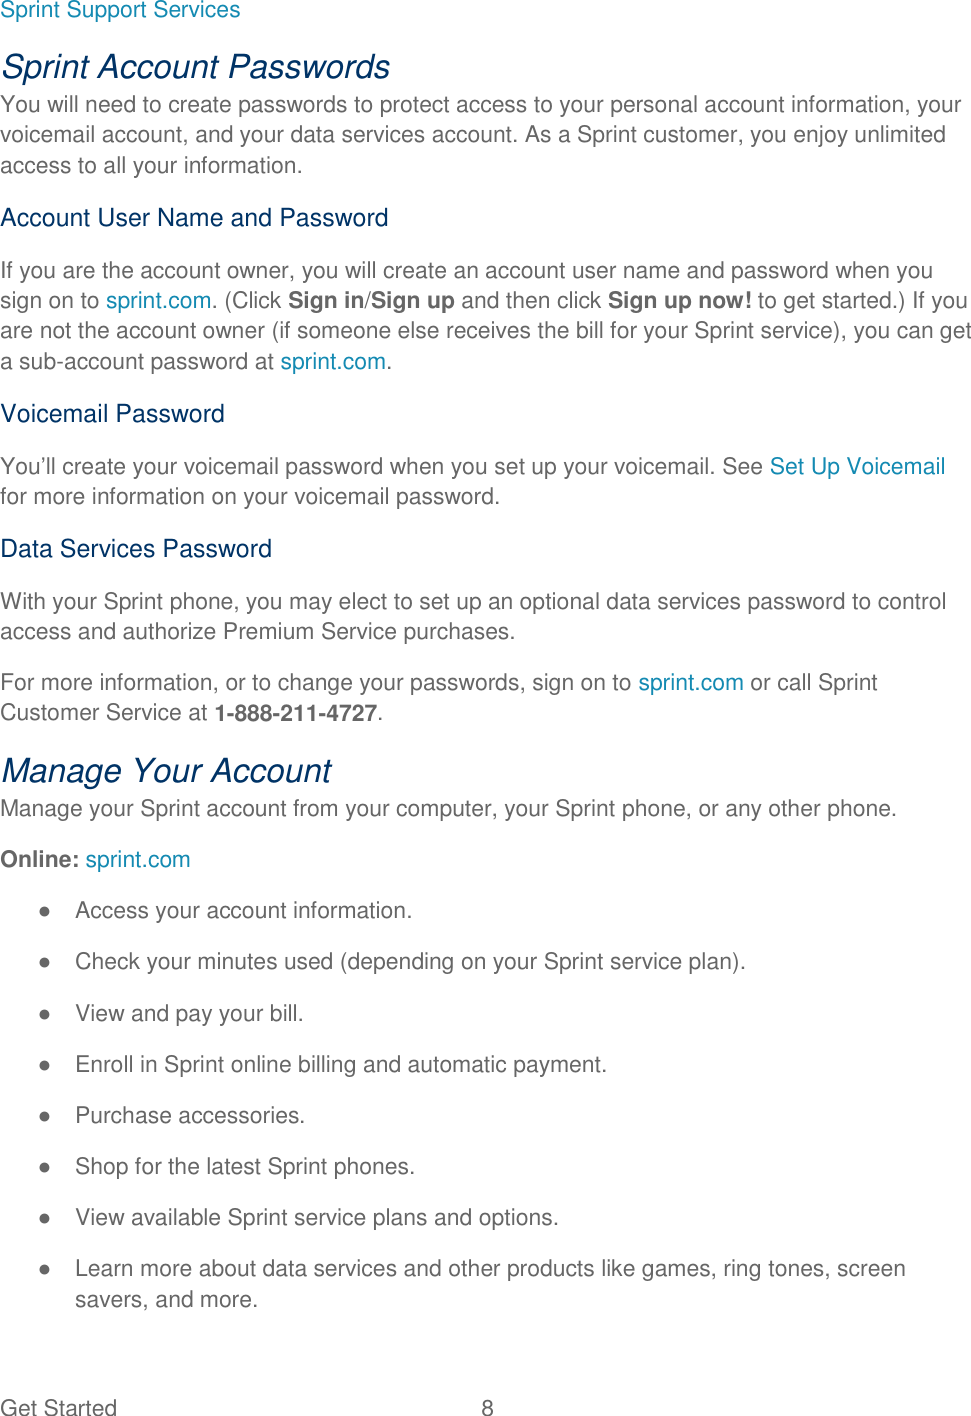 Get Started  8 Sprint Support Services Sprint Account Passwords You will need to create passwords to protect access to your personal account information, your voicemail account, and your data services account. As a Sprint customer, you enjoy unlimited access to all your information. Account User Name and Password If you are the account owner, you will create an account user name and password when you sign on to sprint.com. (Click Sign in/Sign up and then click Sign up now! to get started.) If you are not the account owner (if someone else receives the bill for your Sprint service), you can get a sub-account password at sprint.com. Voicemail Password You’ll create your voicemail password when you set up your voicemail. See Set Up Voicemail for more information on your voicemail password. Data Services Password With your Sprint phone, you may elect to set up an optional data services password to control access and authorize Premium Service purchases. For more information, or to change your passwords, sign on to sprint.com or call Sprint Customer Service at 1-888-211-4727. Manage Your Account Manage your Sprint account from your computer, your Sprint phone, or any other phone. Online: sprint.com ●  Access your account information. ●  Check your minutes used (depending on your Sprint service plan). ●  View and pay your bill. ●  Enroll in Sprint online billing and automatic payment. ●  Purchase accessories. ●  Shop for the latest Sprint phones. ●  View available Sprint service plans and options. ●  Learn more about data services and other products like games, ring tones, screen savers, and more. 